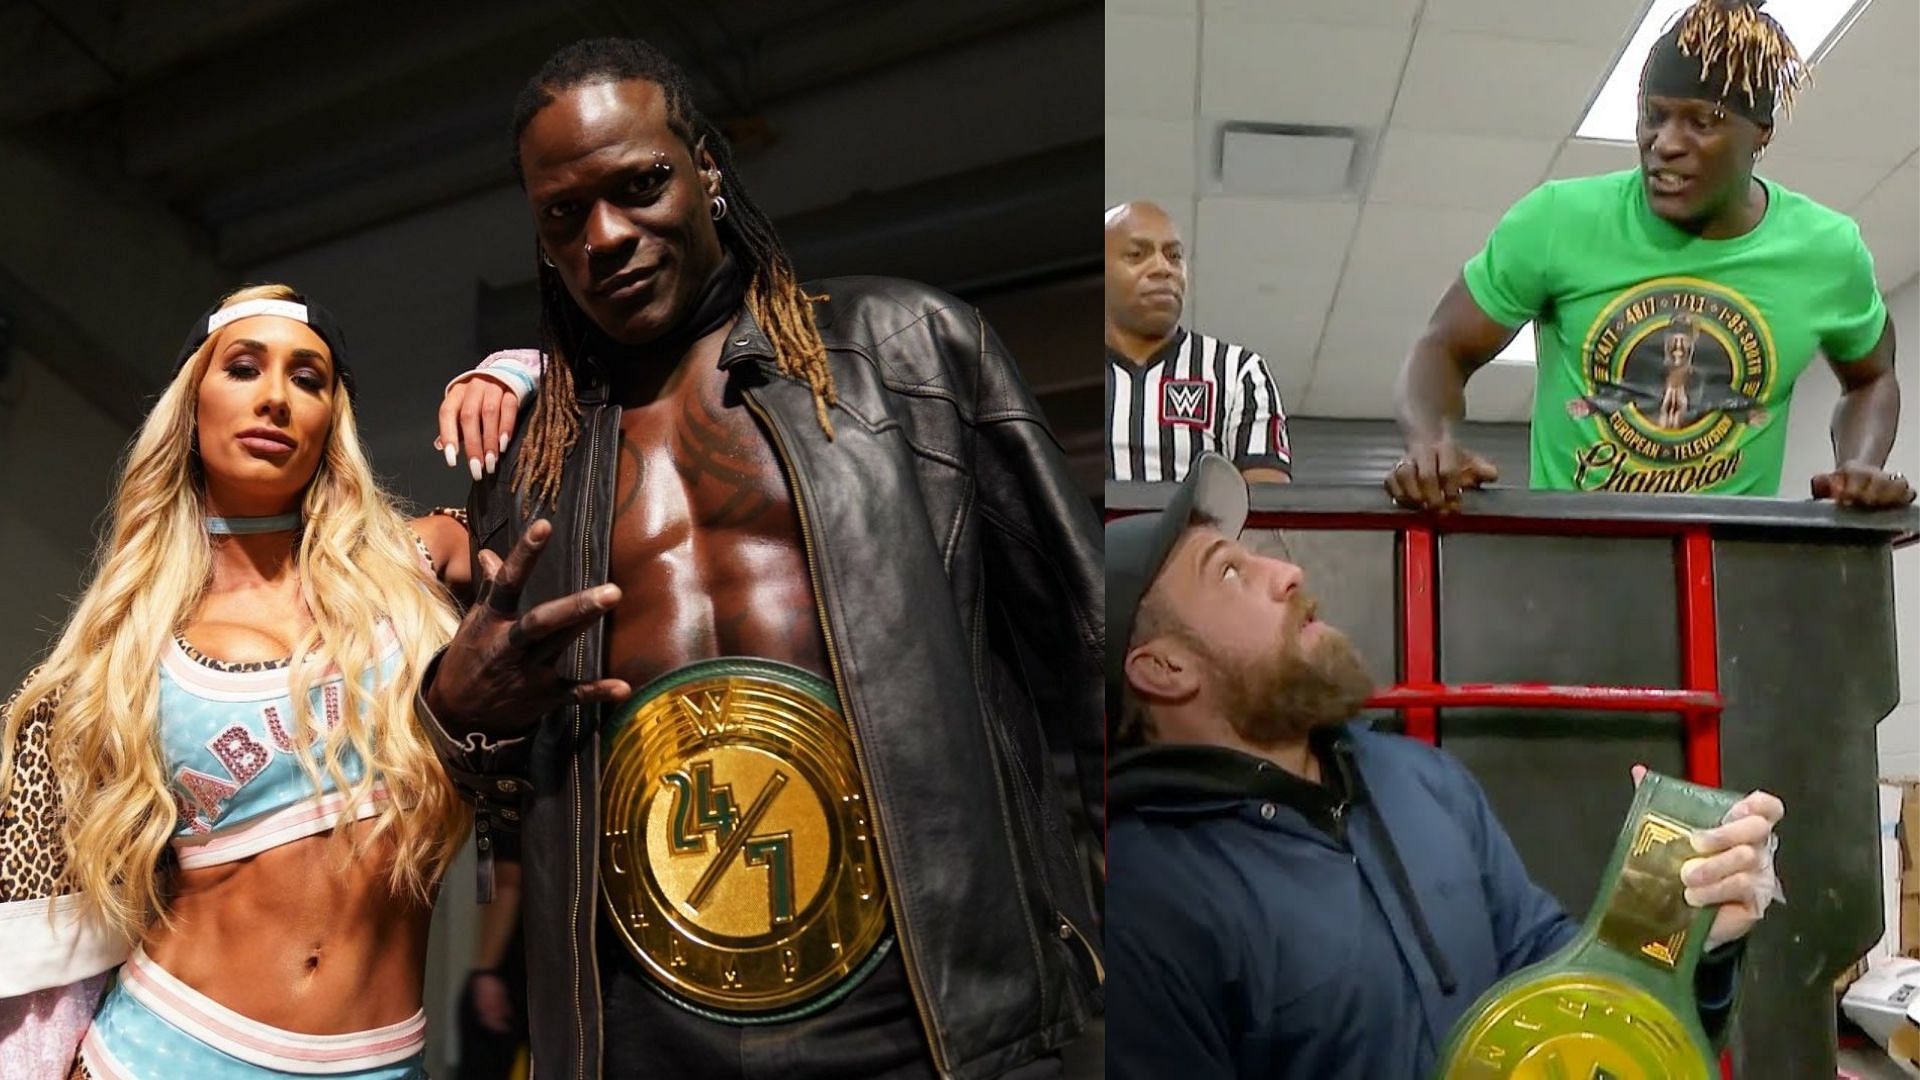 How many times has RTruth won the WWE 24/7 Championship?